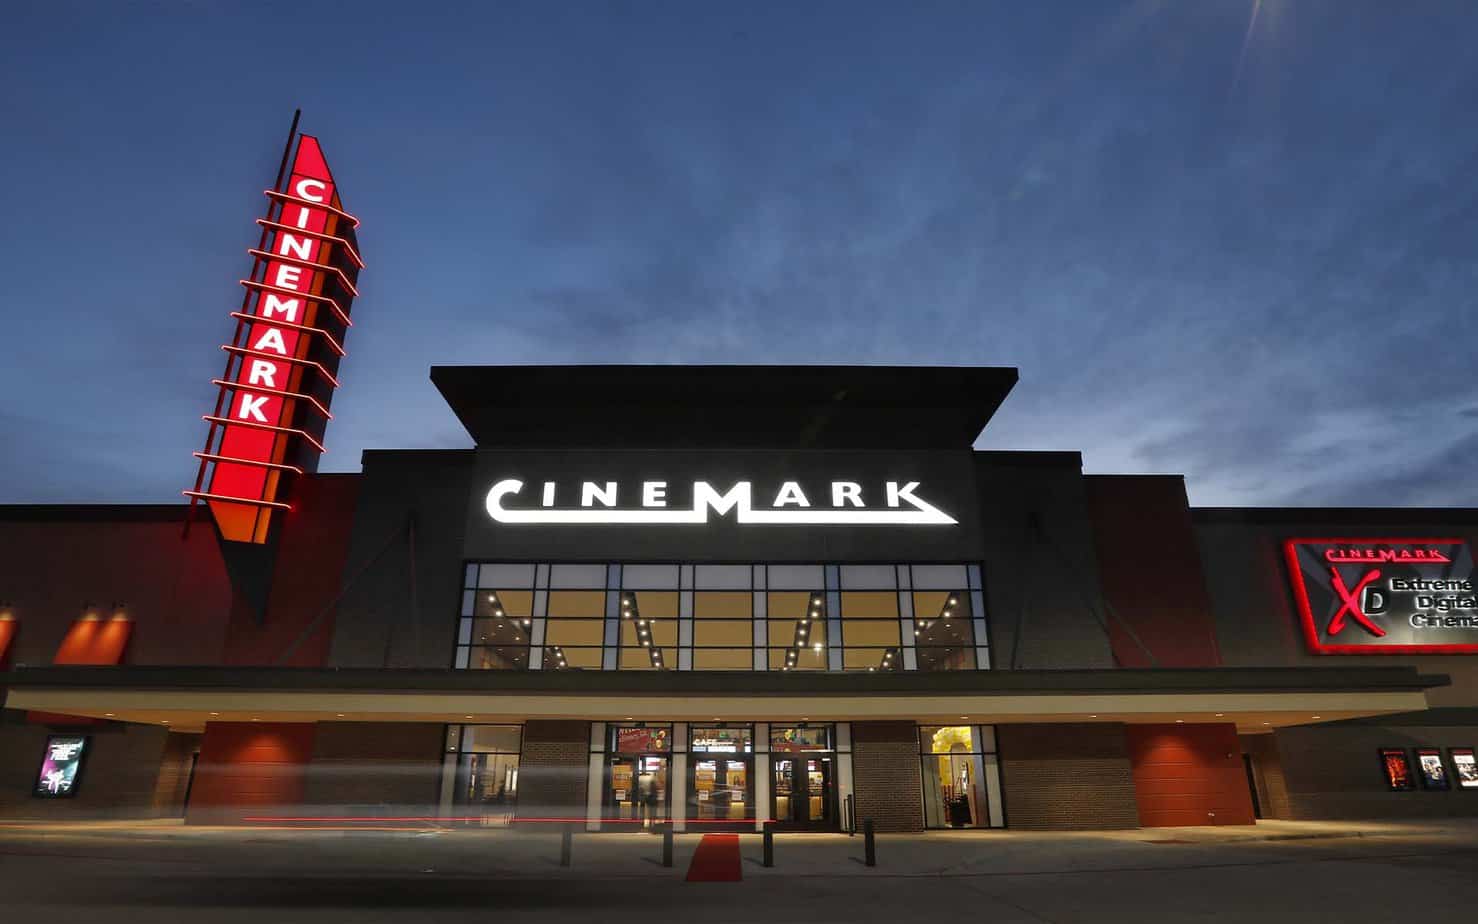 Cinemark Reopening in July - Sean Gamble CEO shares optimistic plan